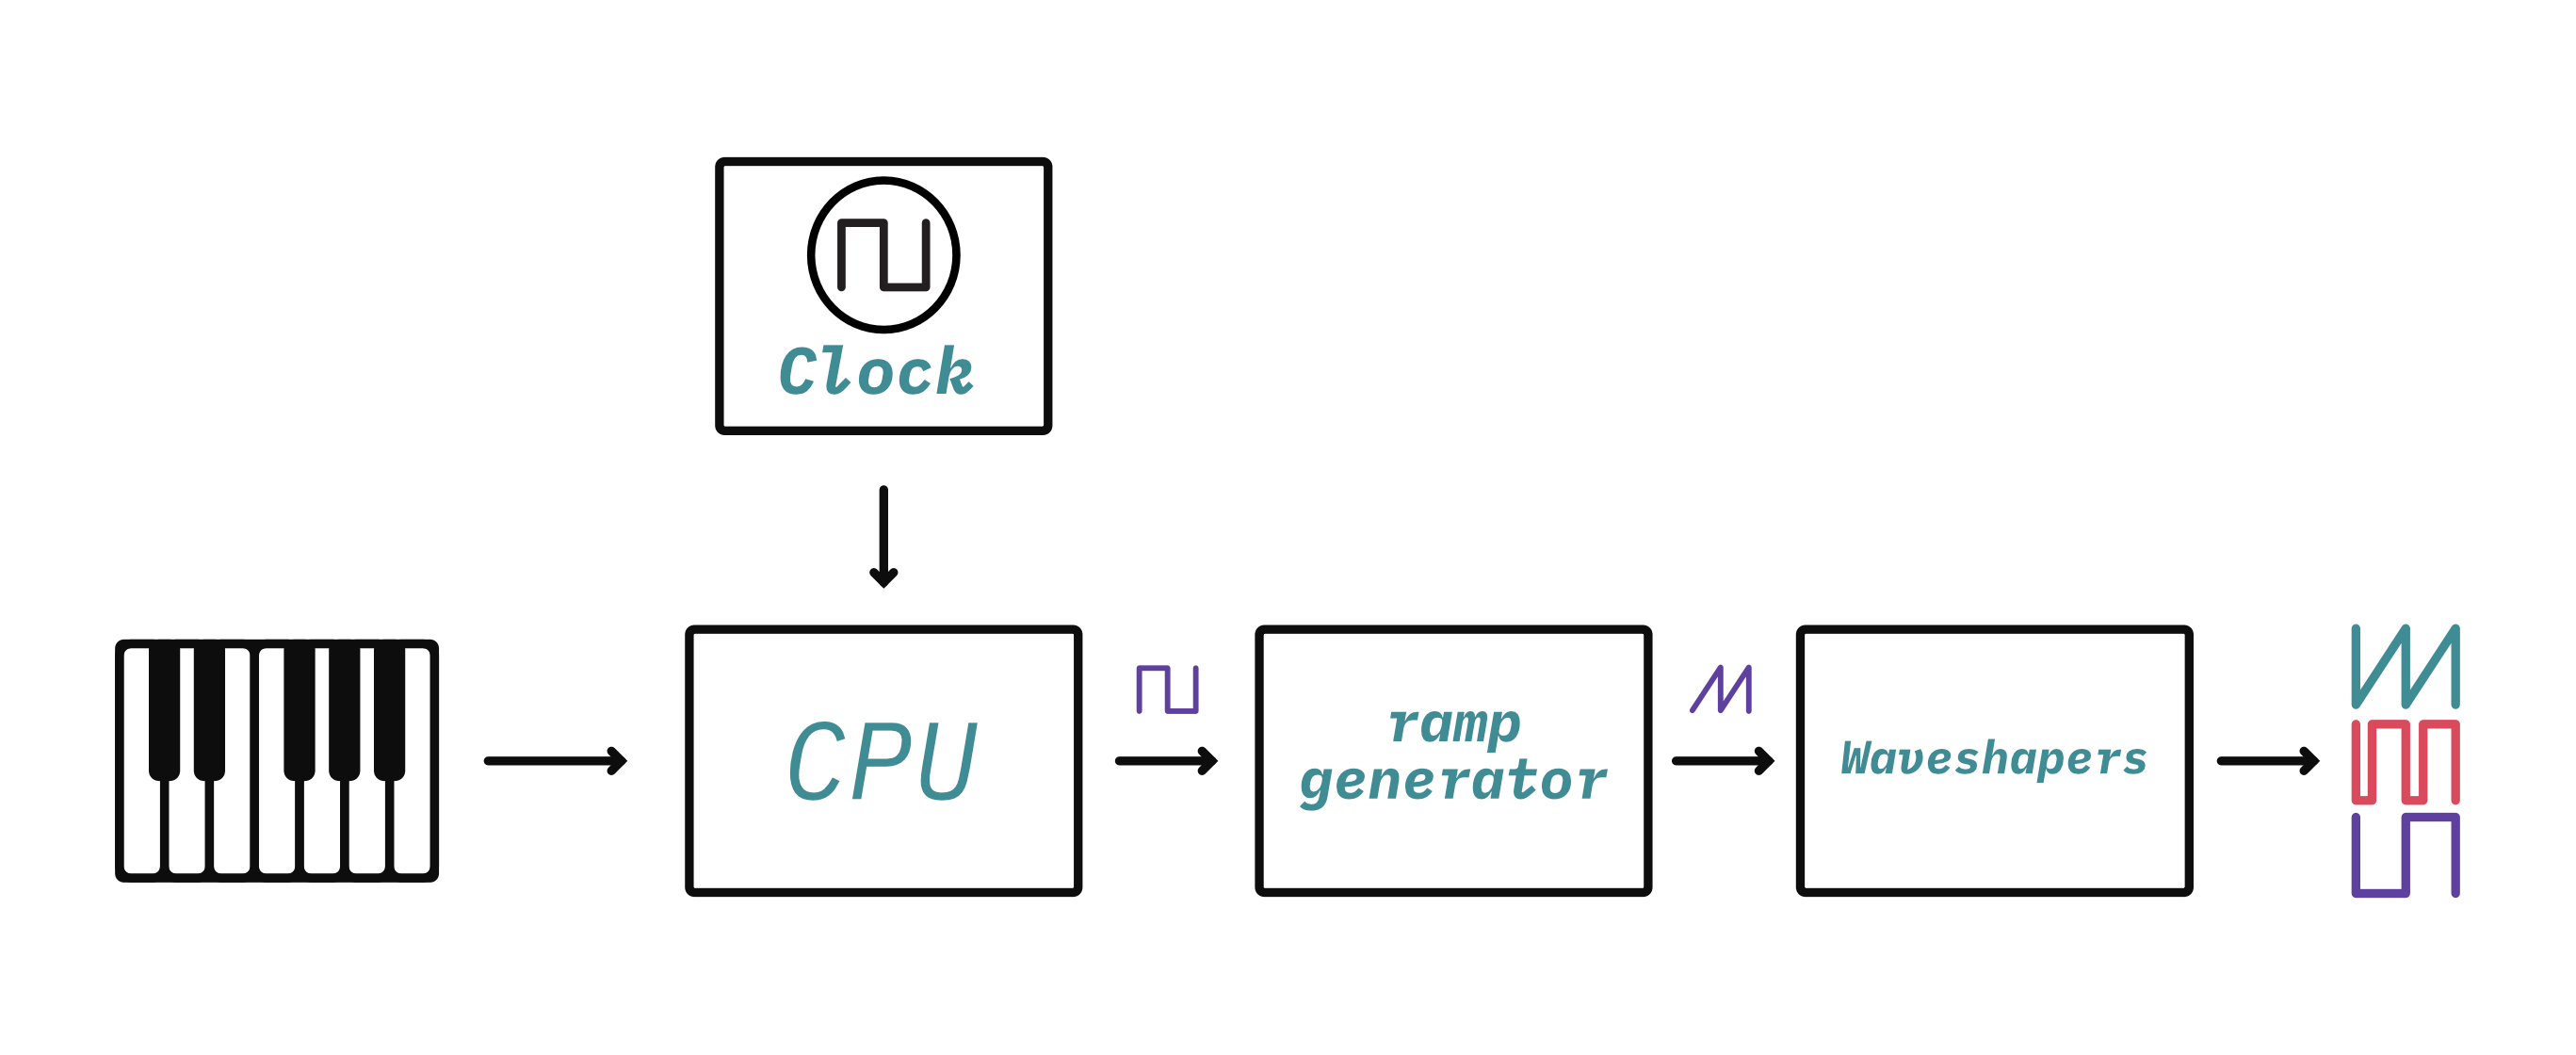 A block diagram of a DCO-based synth